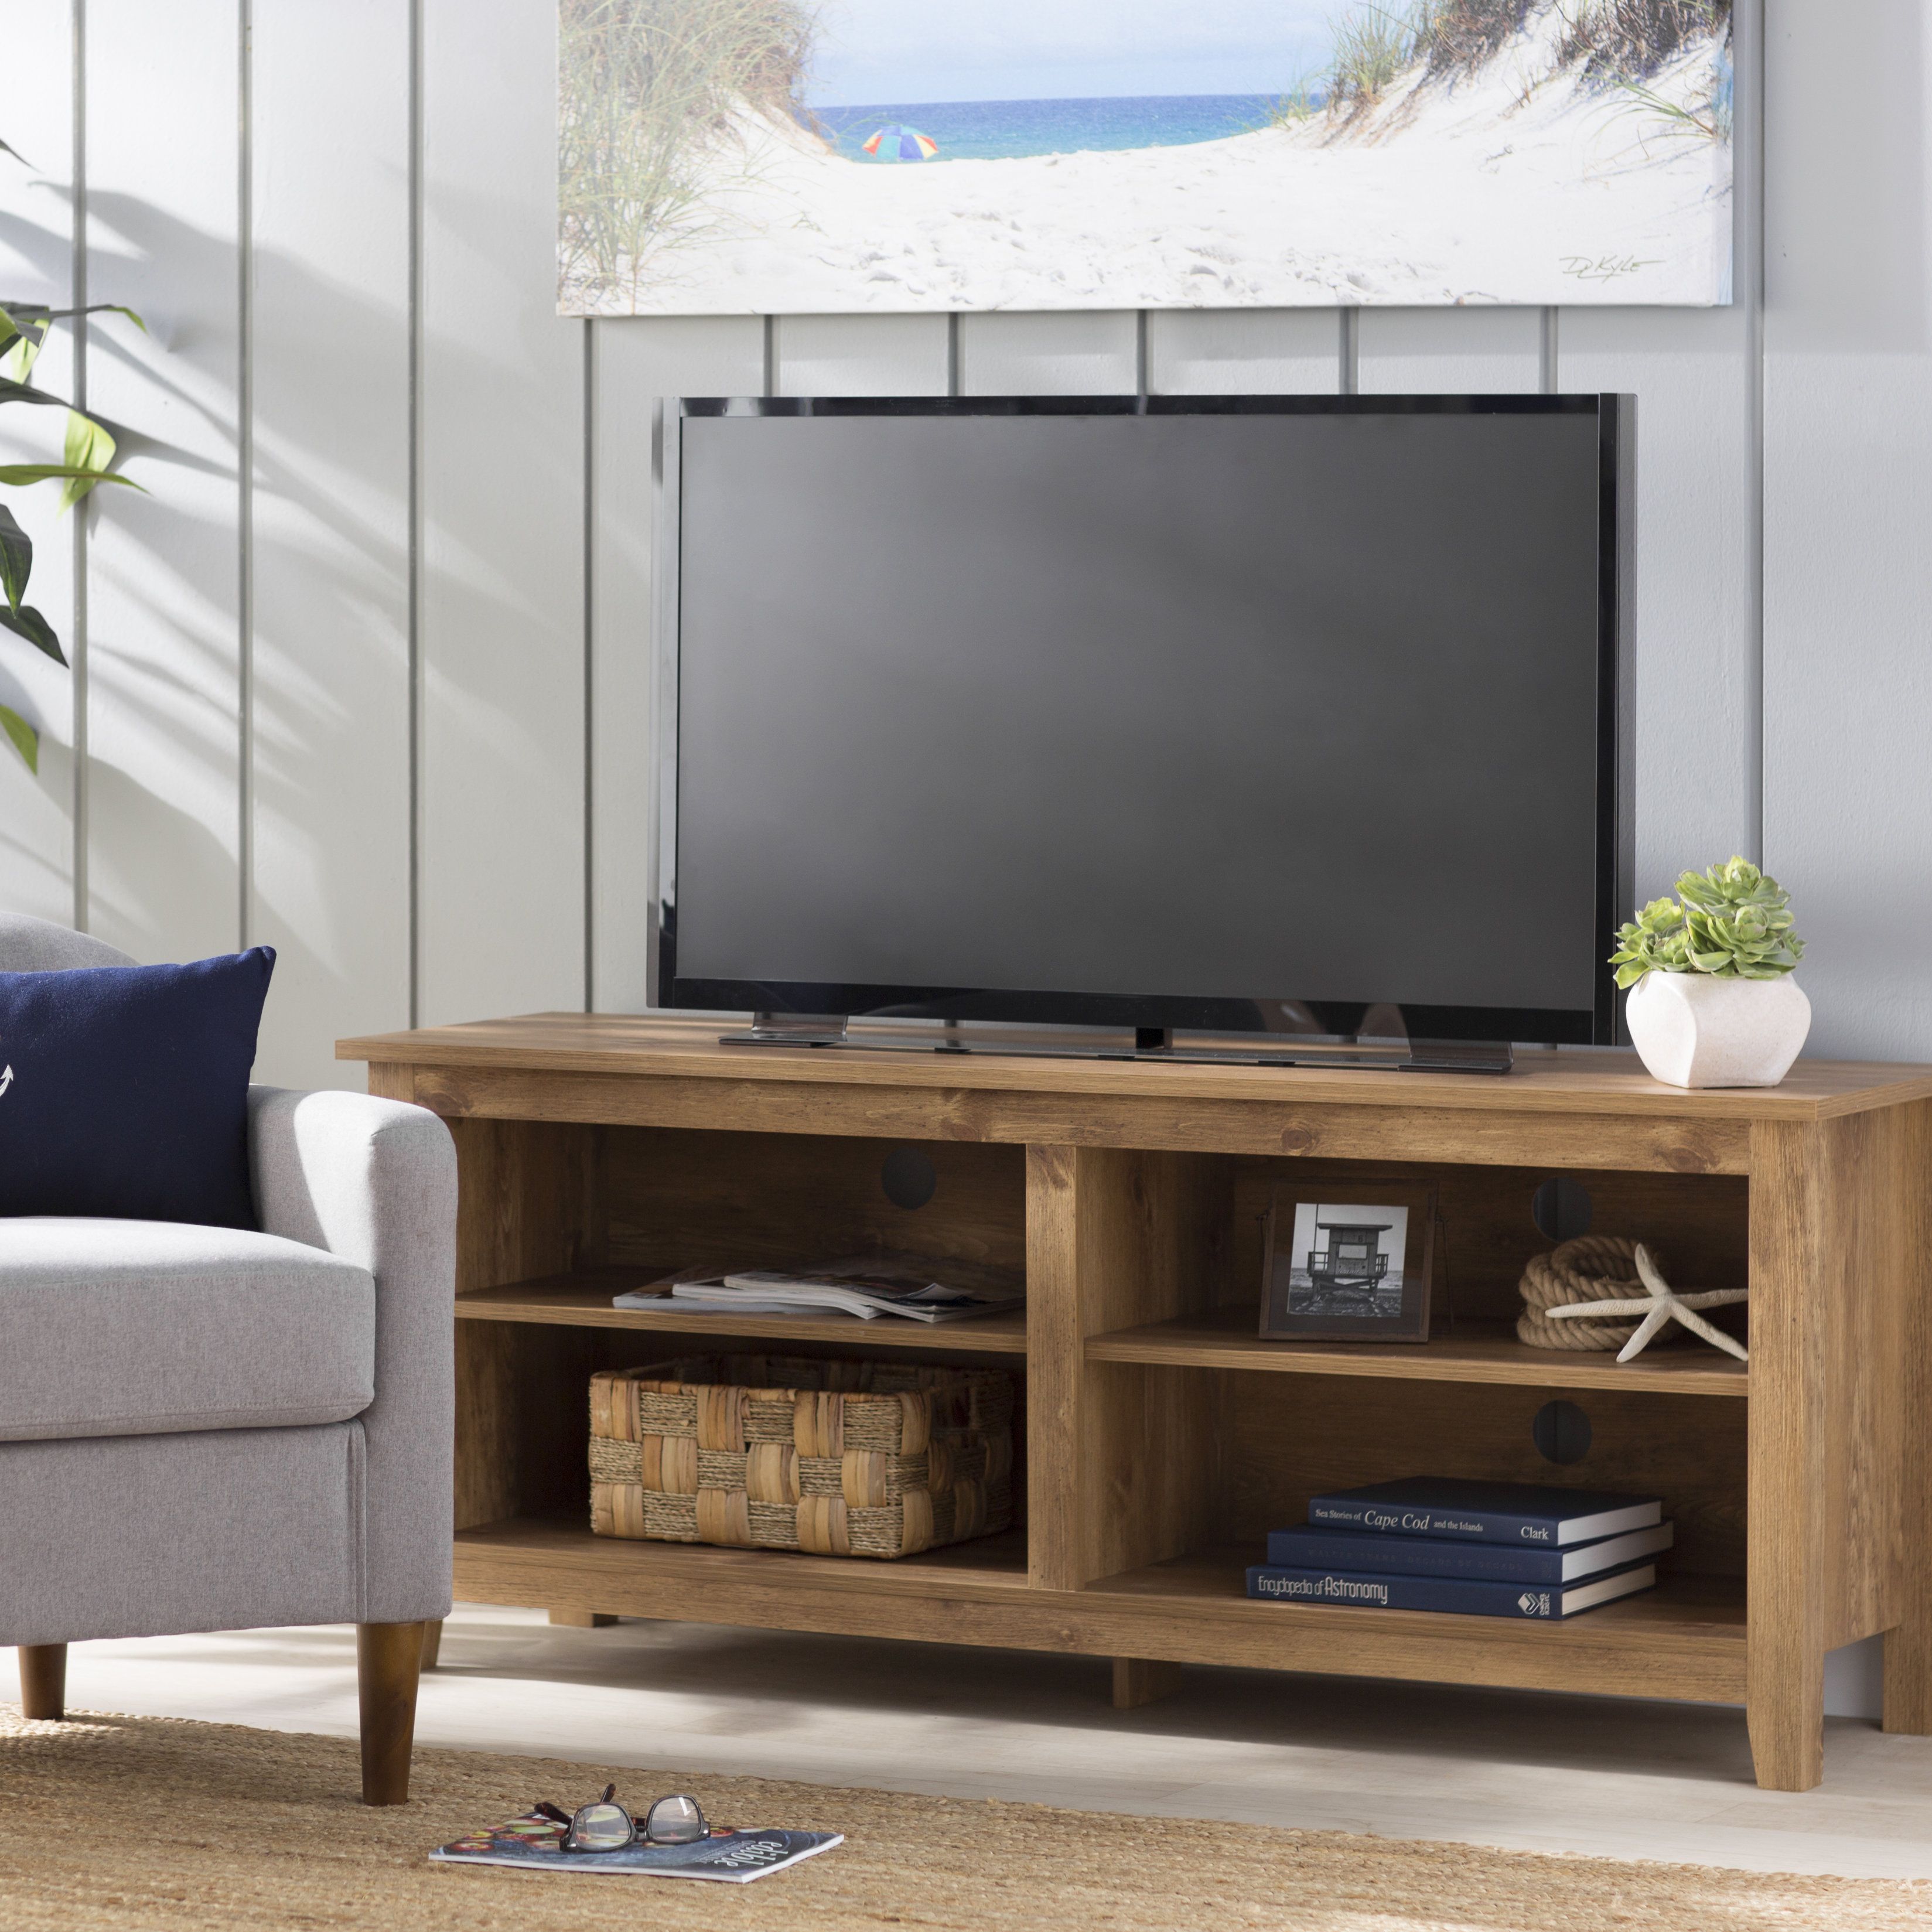 90 Inch Tv Stand | Wayfair Inside Laurent 50 Inch Tv Stands (View 3 of 30)